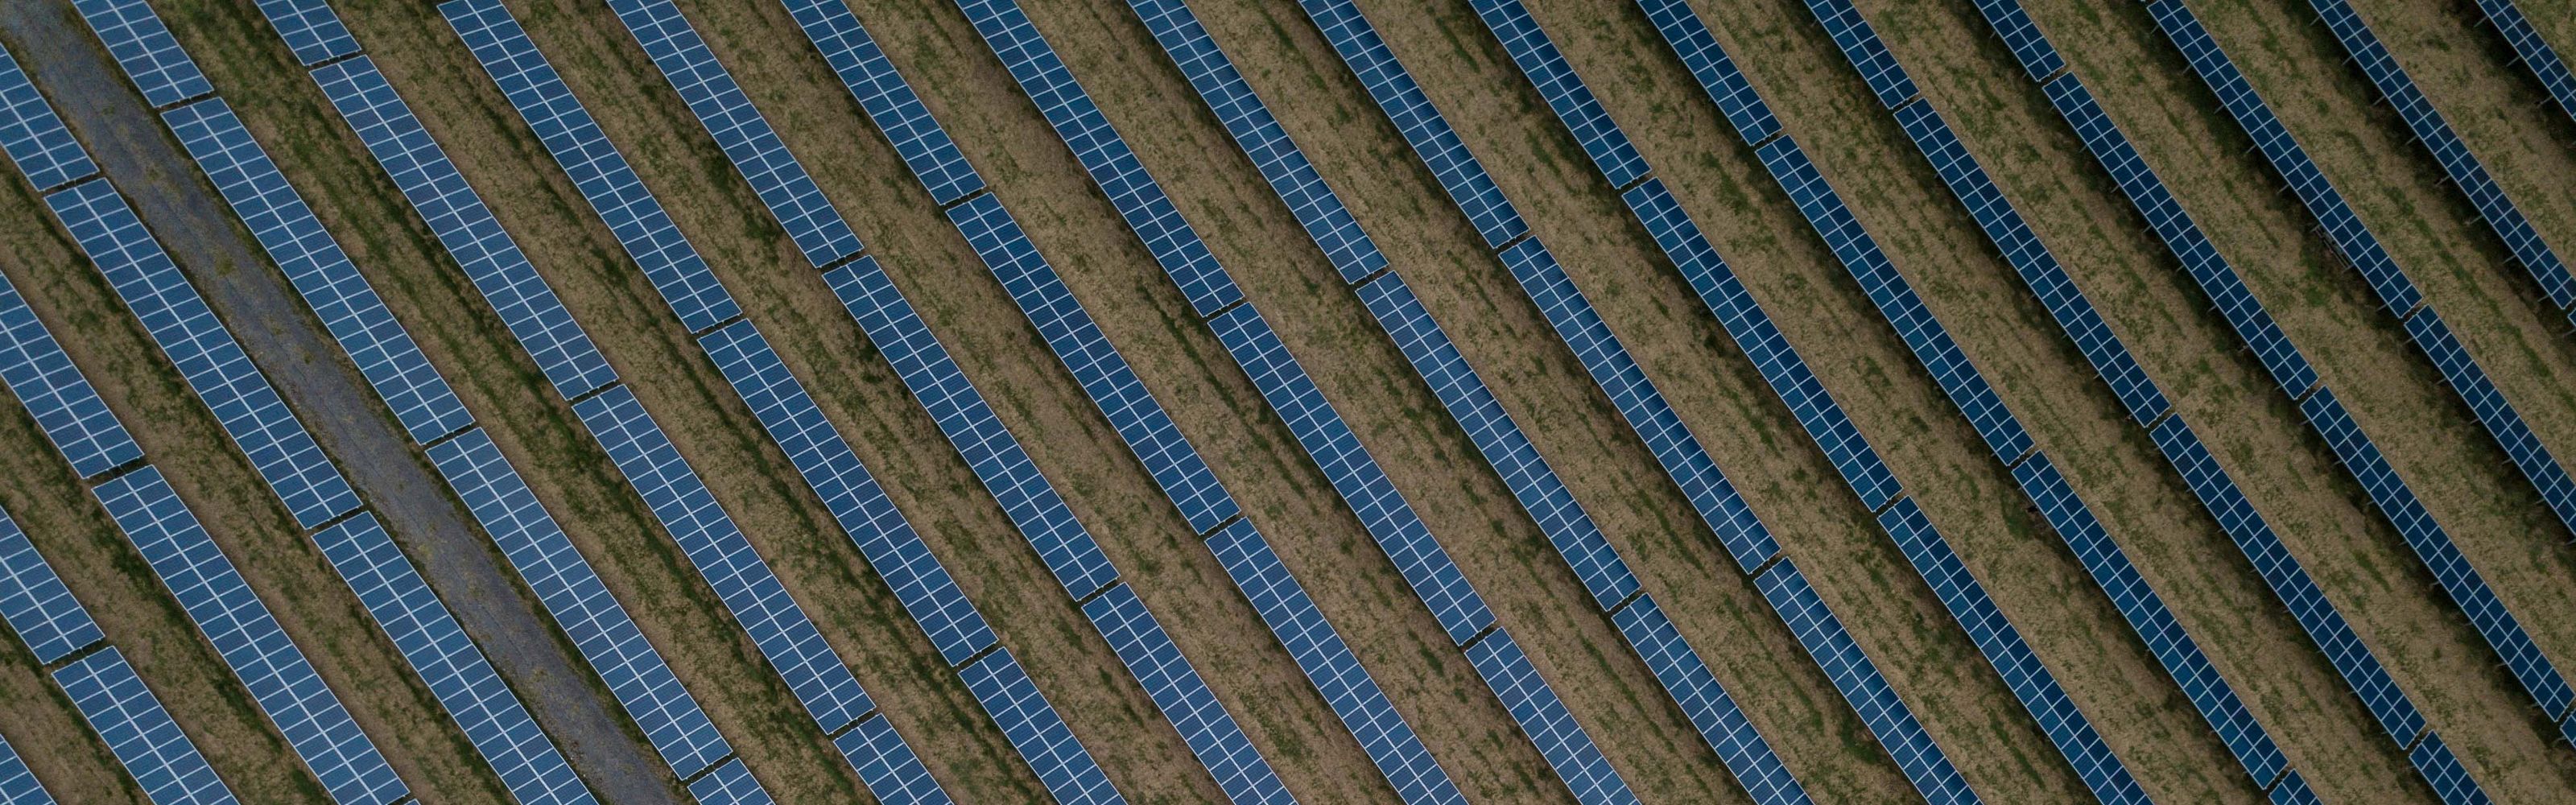 Aerial view of solar panels in a field 